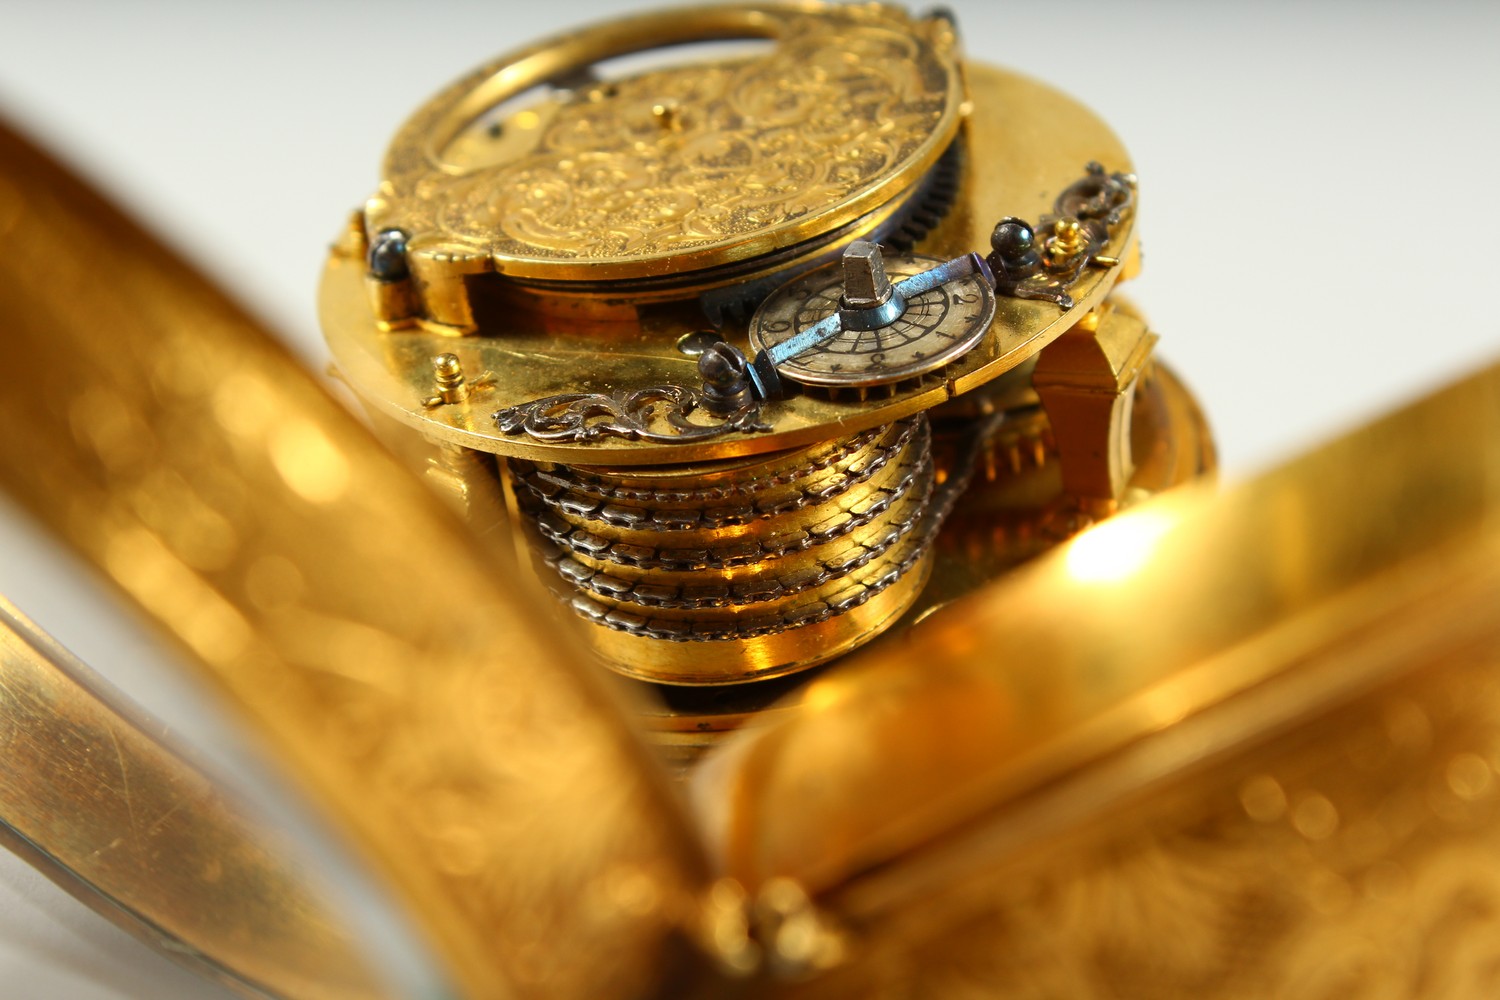 A VERY GOOD EARLY 18TH CENTURY FRENCH ONION WATCH by JOLLY, PARIS, with verge movement, the face - Image 8 of 11